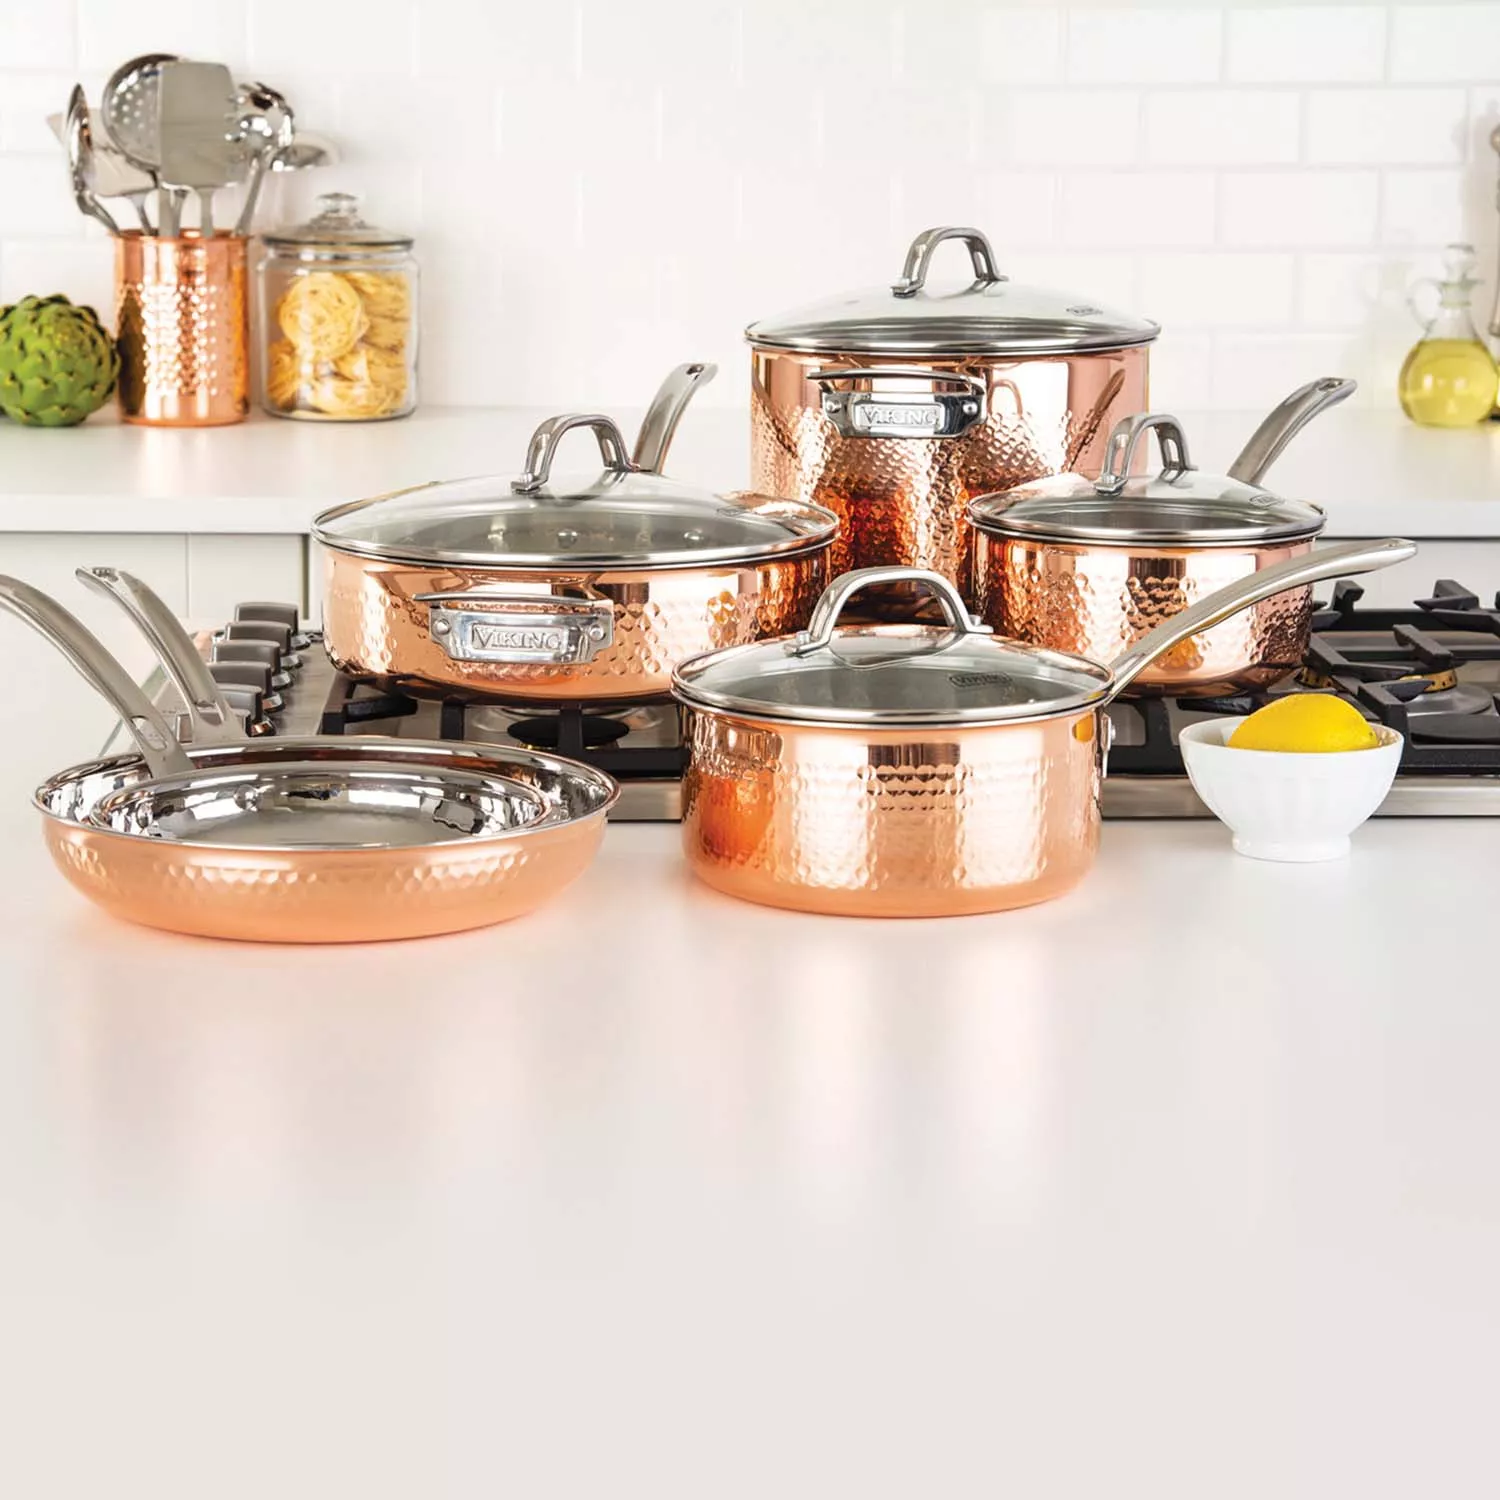 HexClad cookware: Get our favorite overall cookware set for 40% off